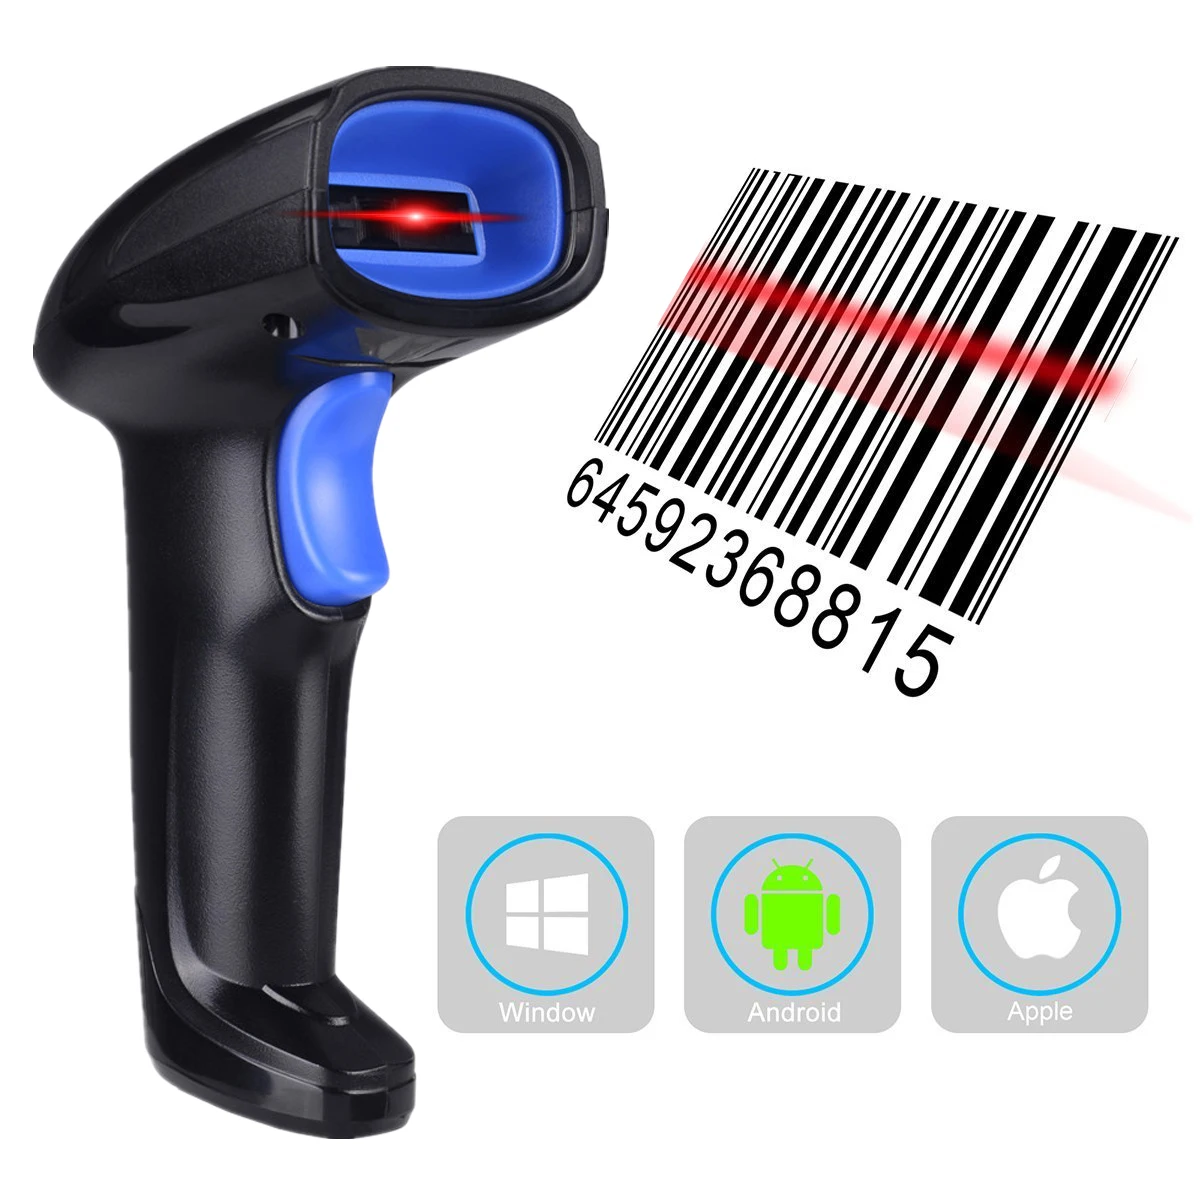 IOS/Android/Windows Compatible 1D CCD BT Barcode Scanner Barcode Reader